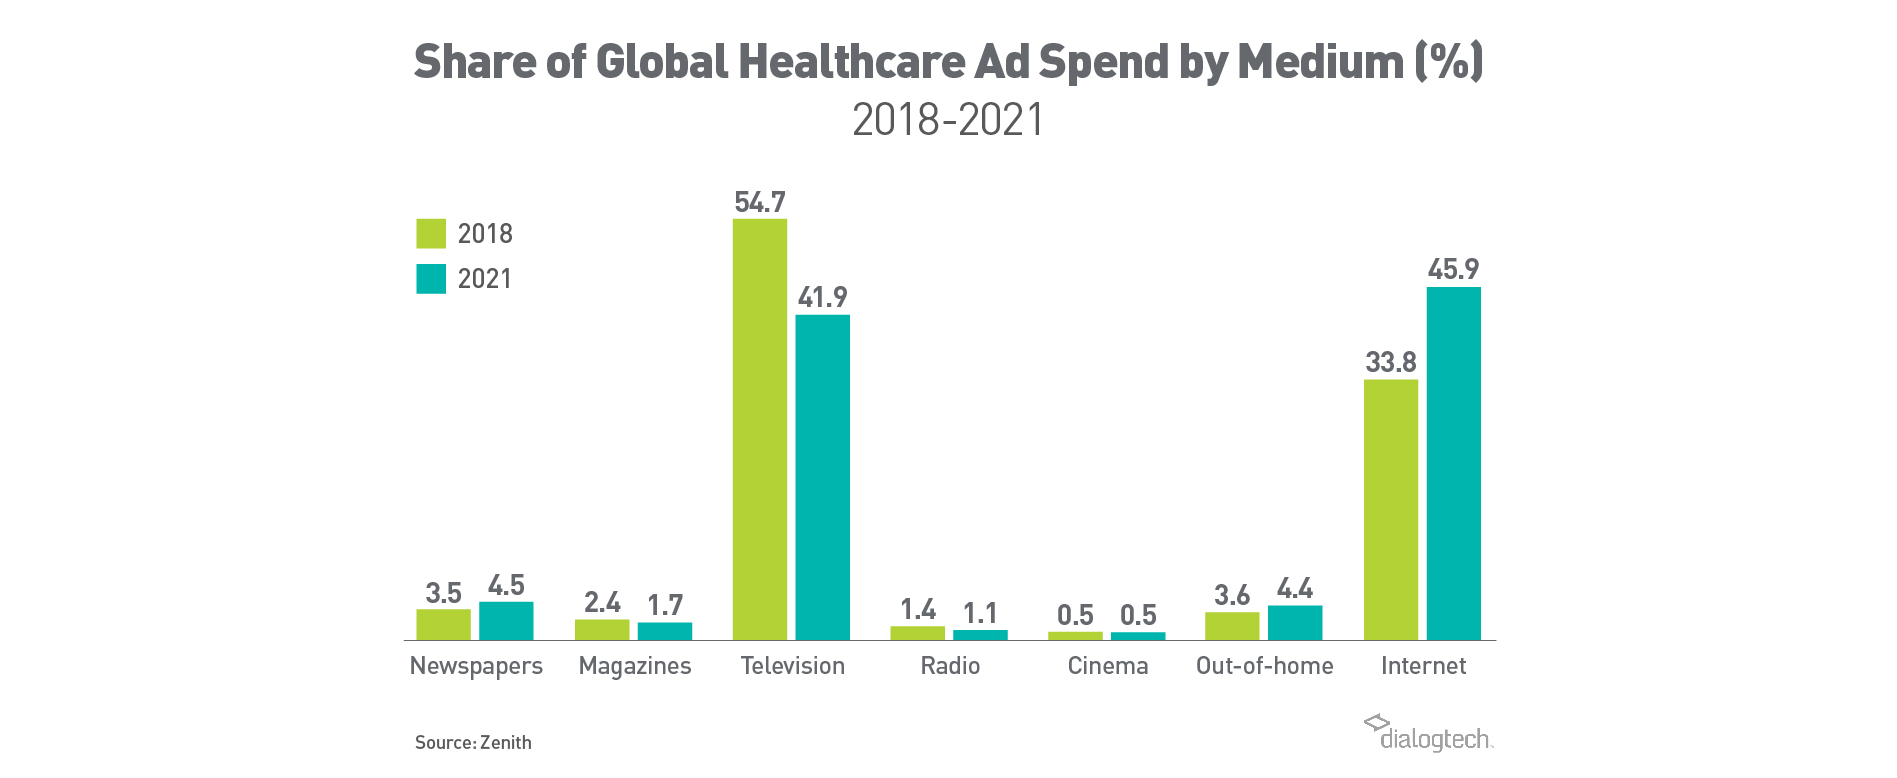 Share of Global Healthcare Spend by Medium (%)